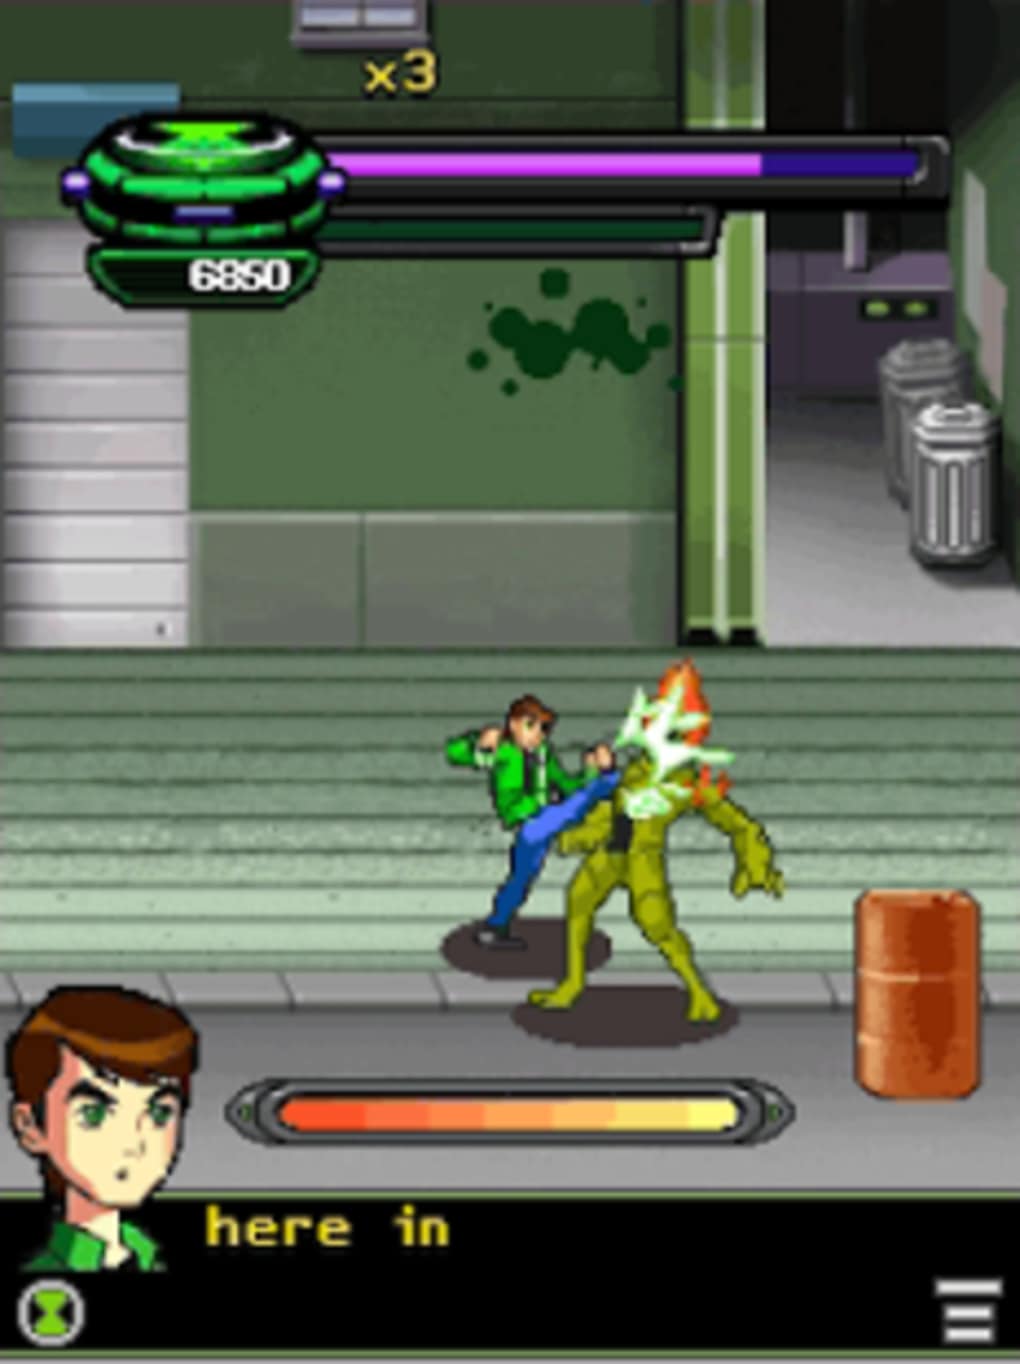 ben 10 games free download for pc windows 7